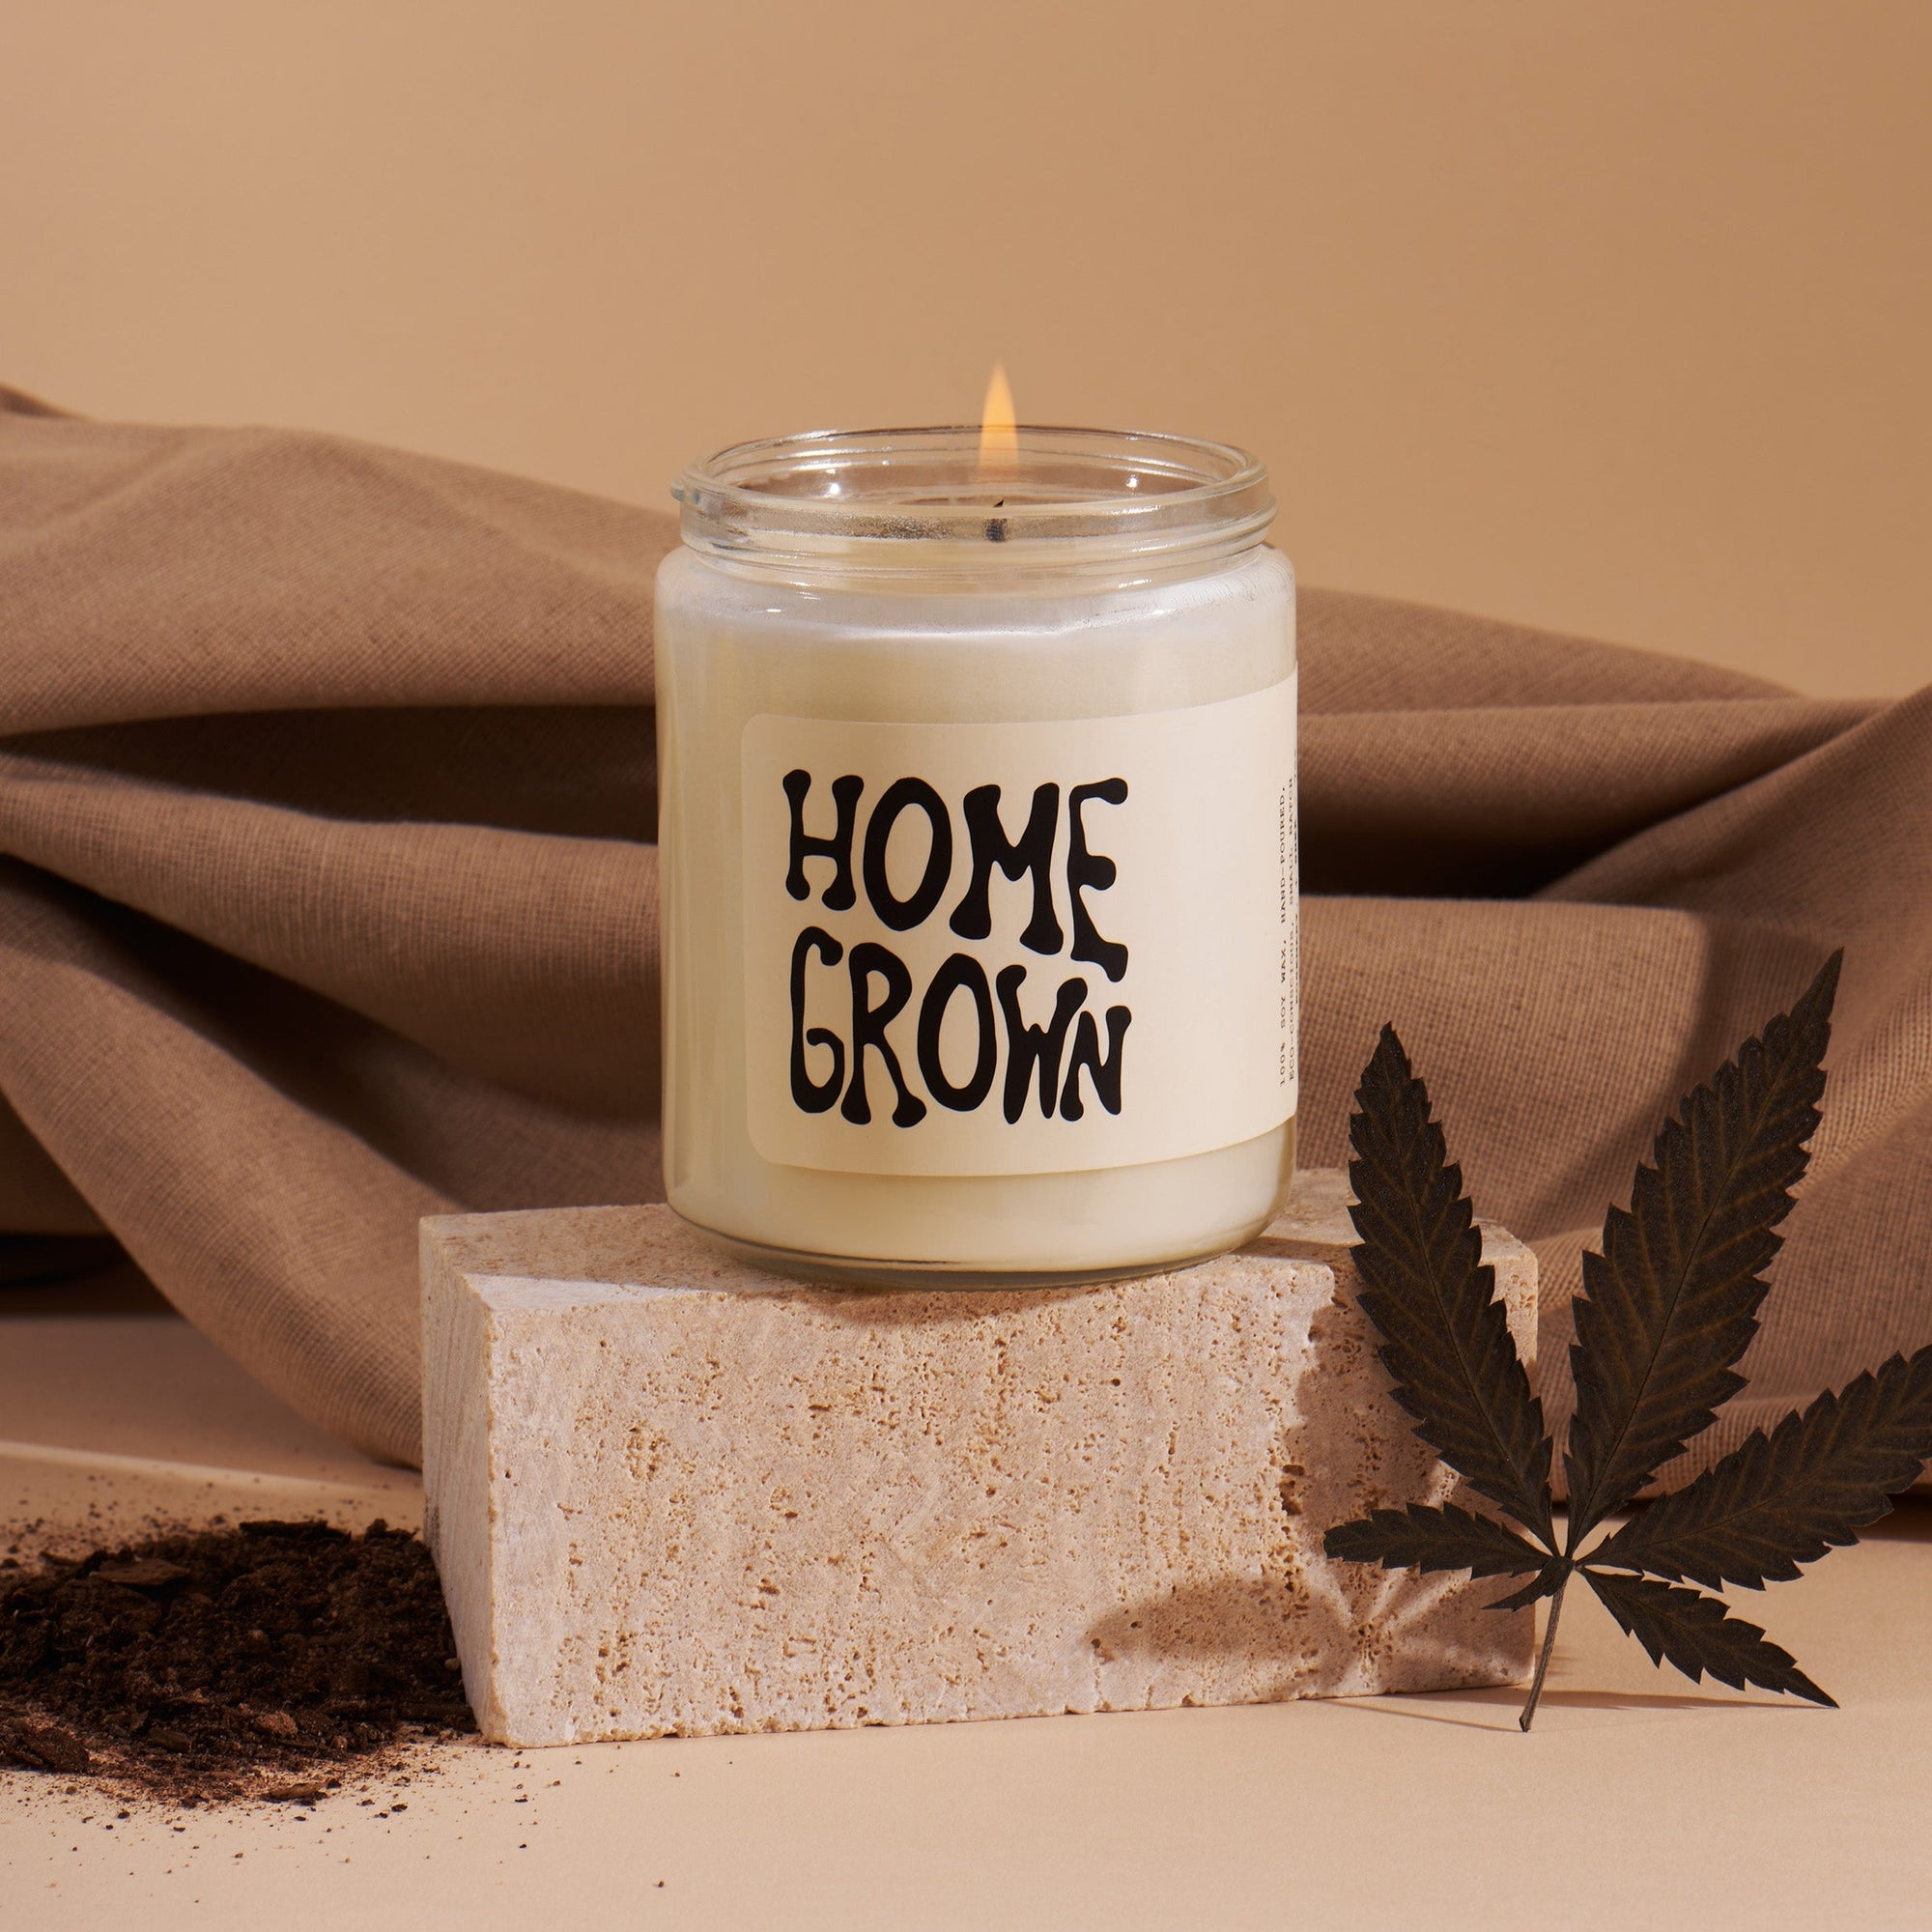 Home Grown - Candle - MOCO Candles